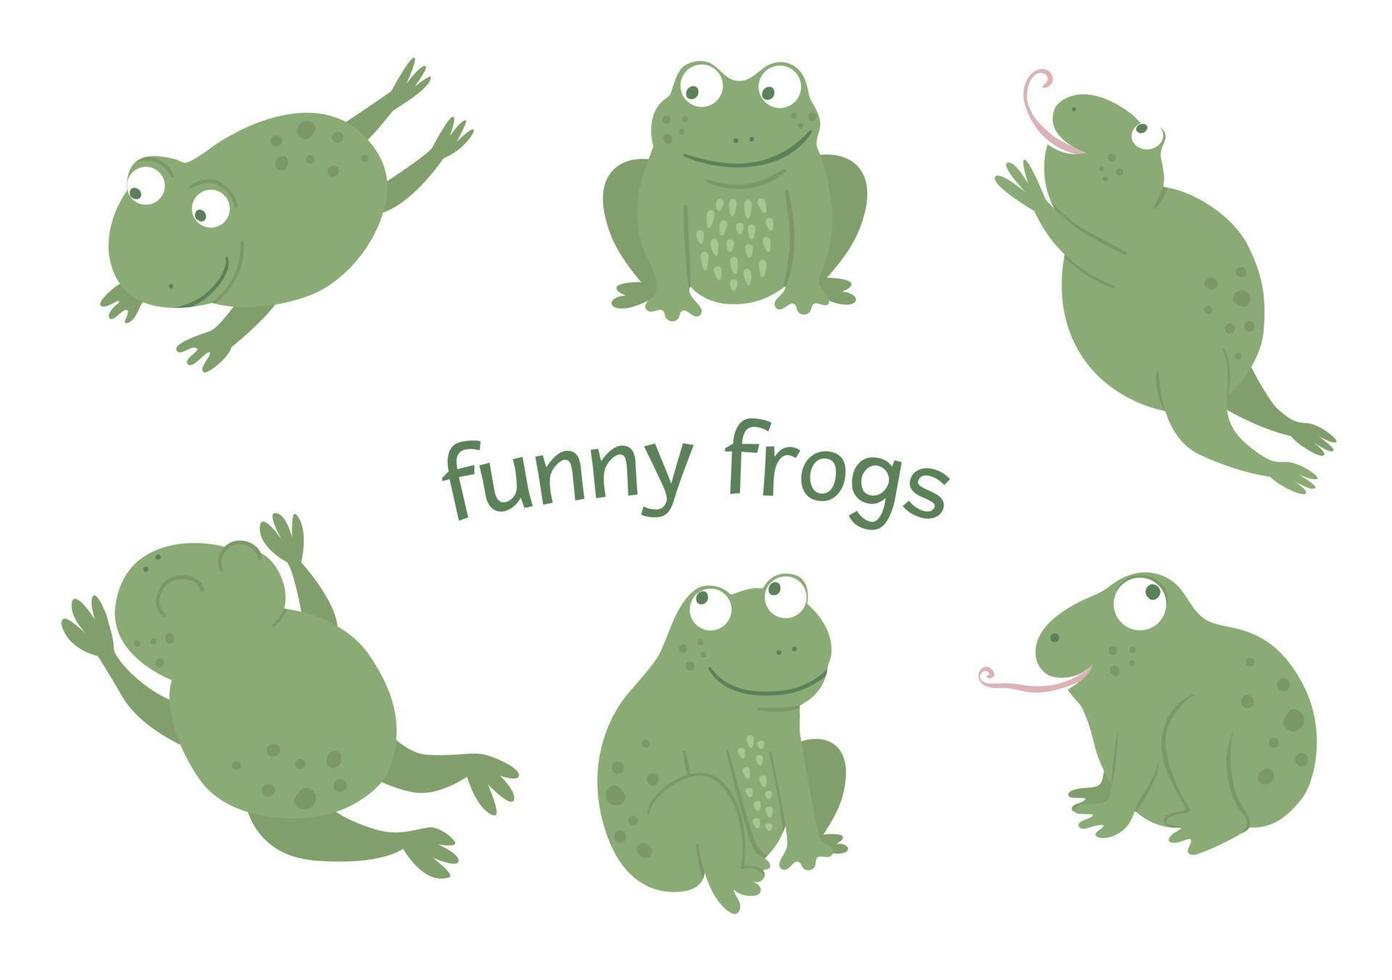 Vector set of cartoon style flat funny frogs in different poses. Cute illustration of woodland swamp animals. Collection of amphibians